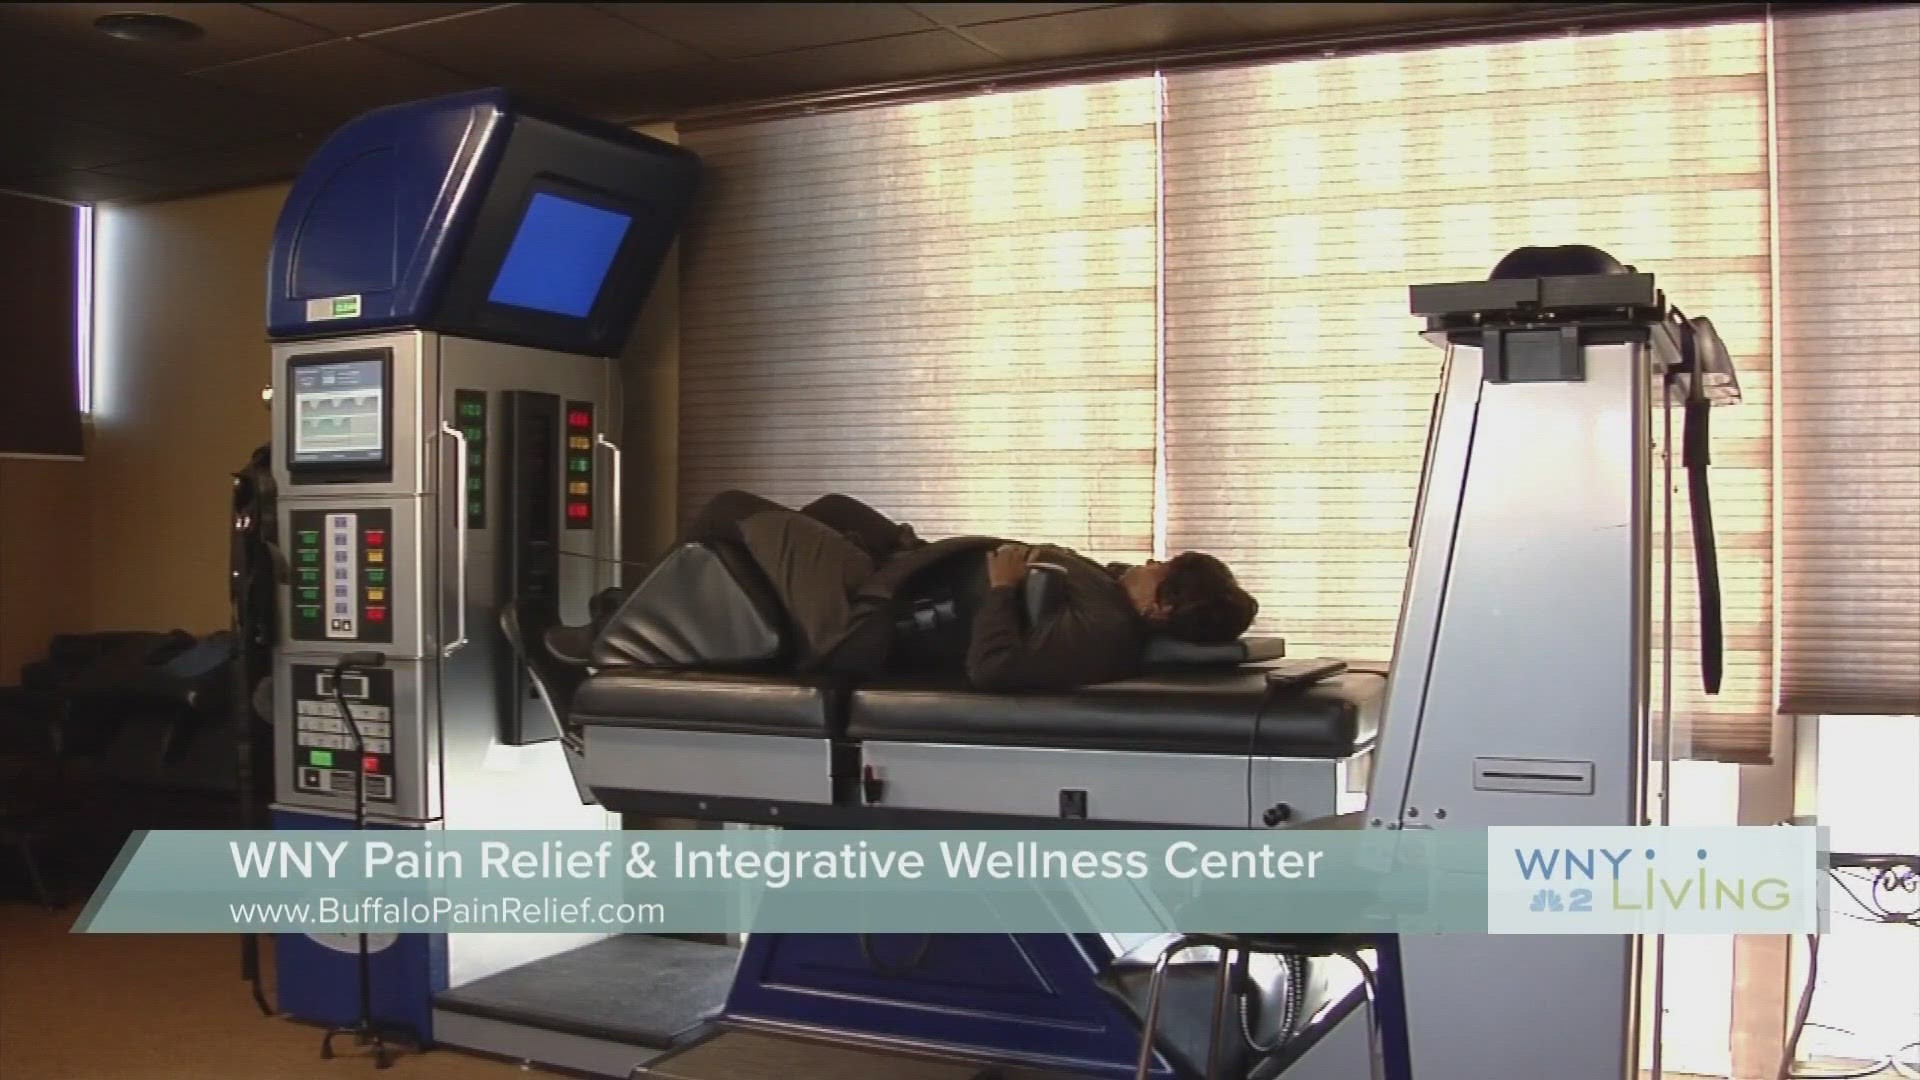 WNY LIVING- May 6 - WNY Pain Relief & Integrative Wellness Center (THIS VIDEO IS SPONSORED BY WNY PAIN RELIEF & INTEGRATIVE WELLNESS CENTER)